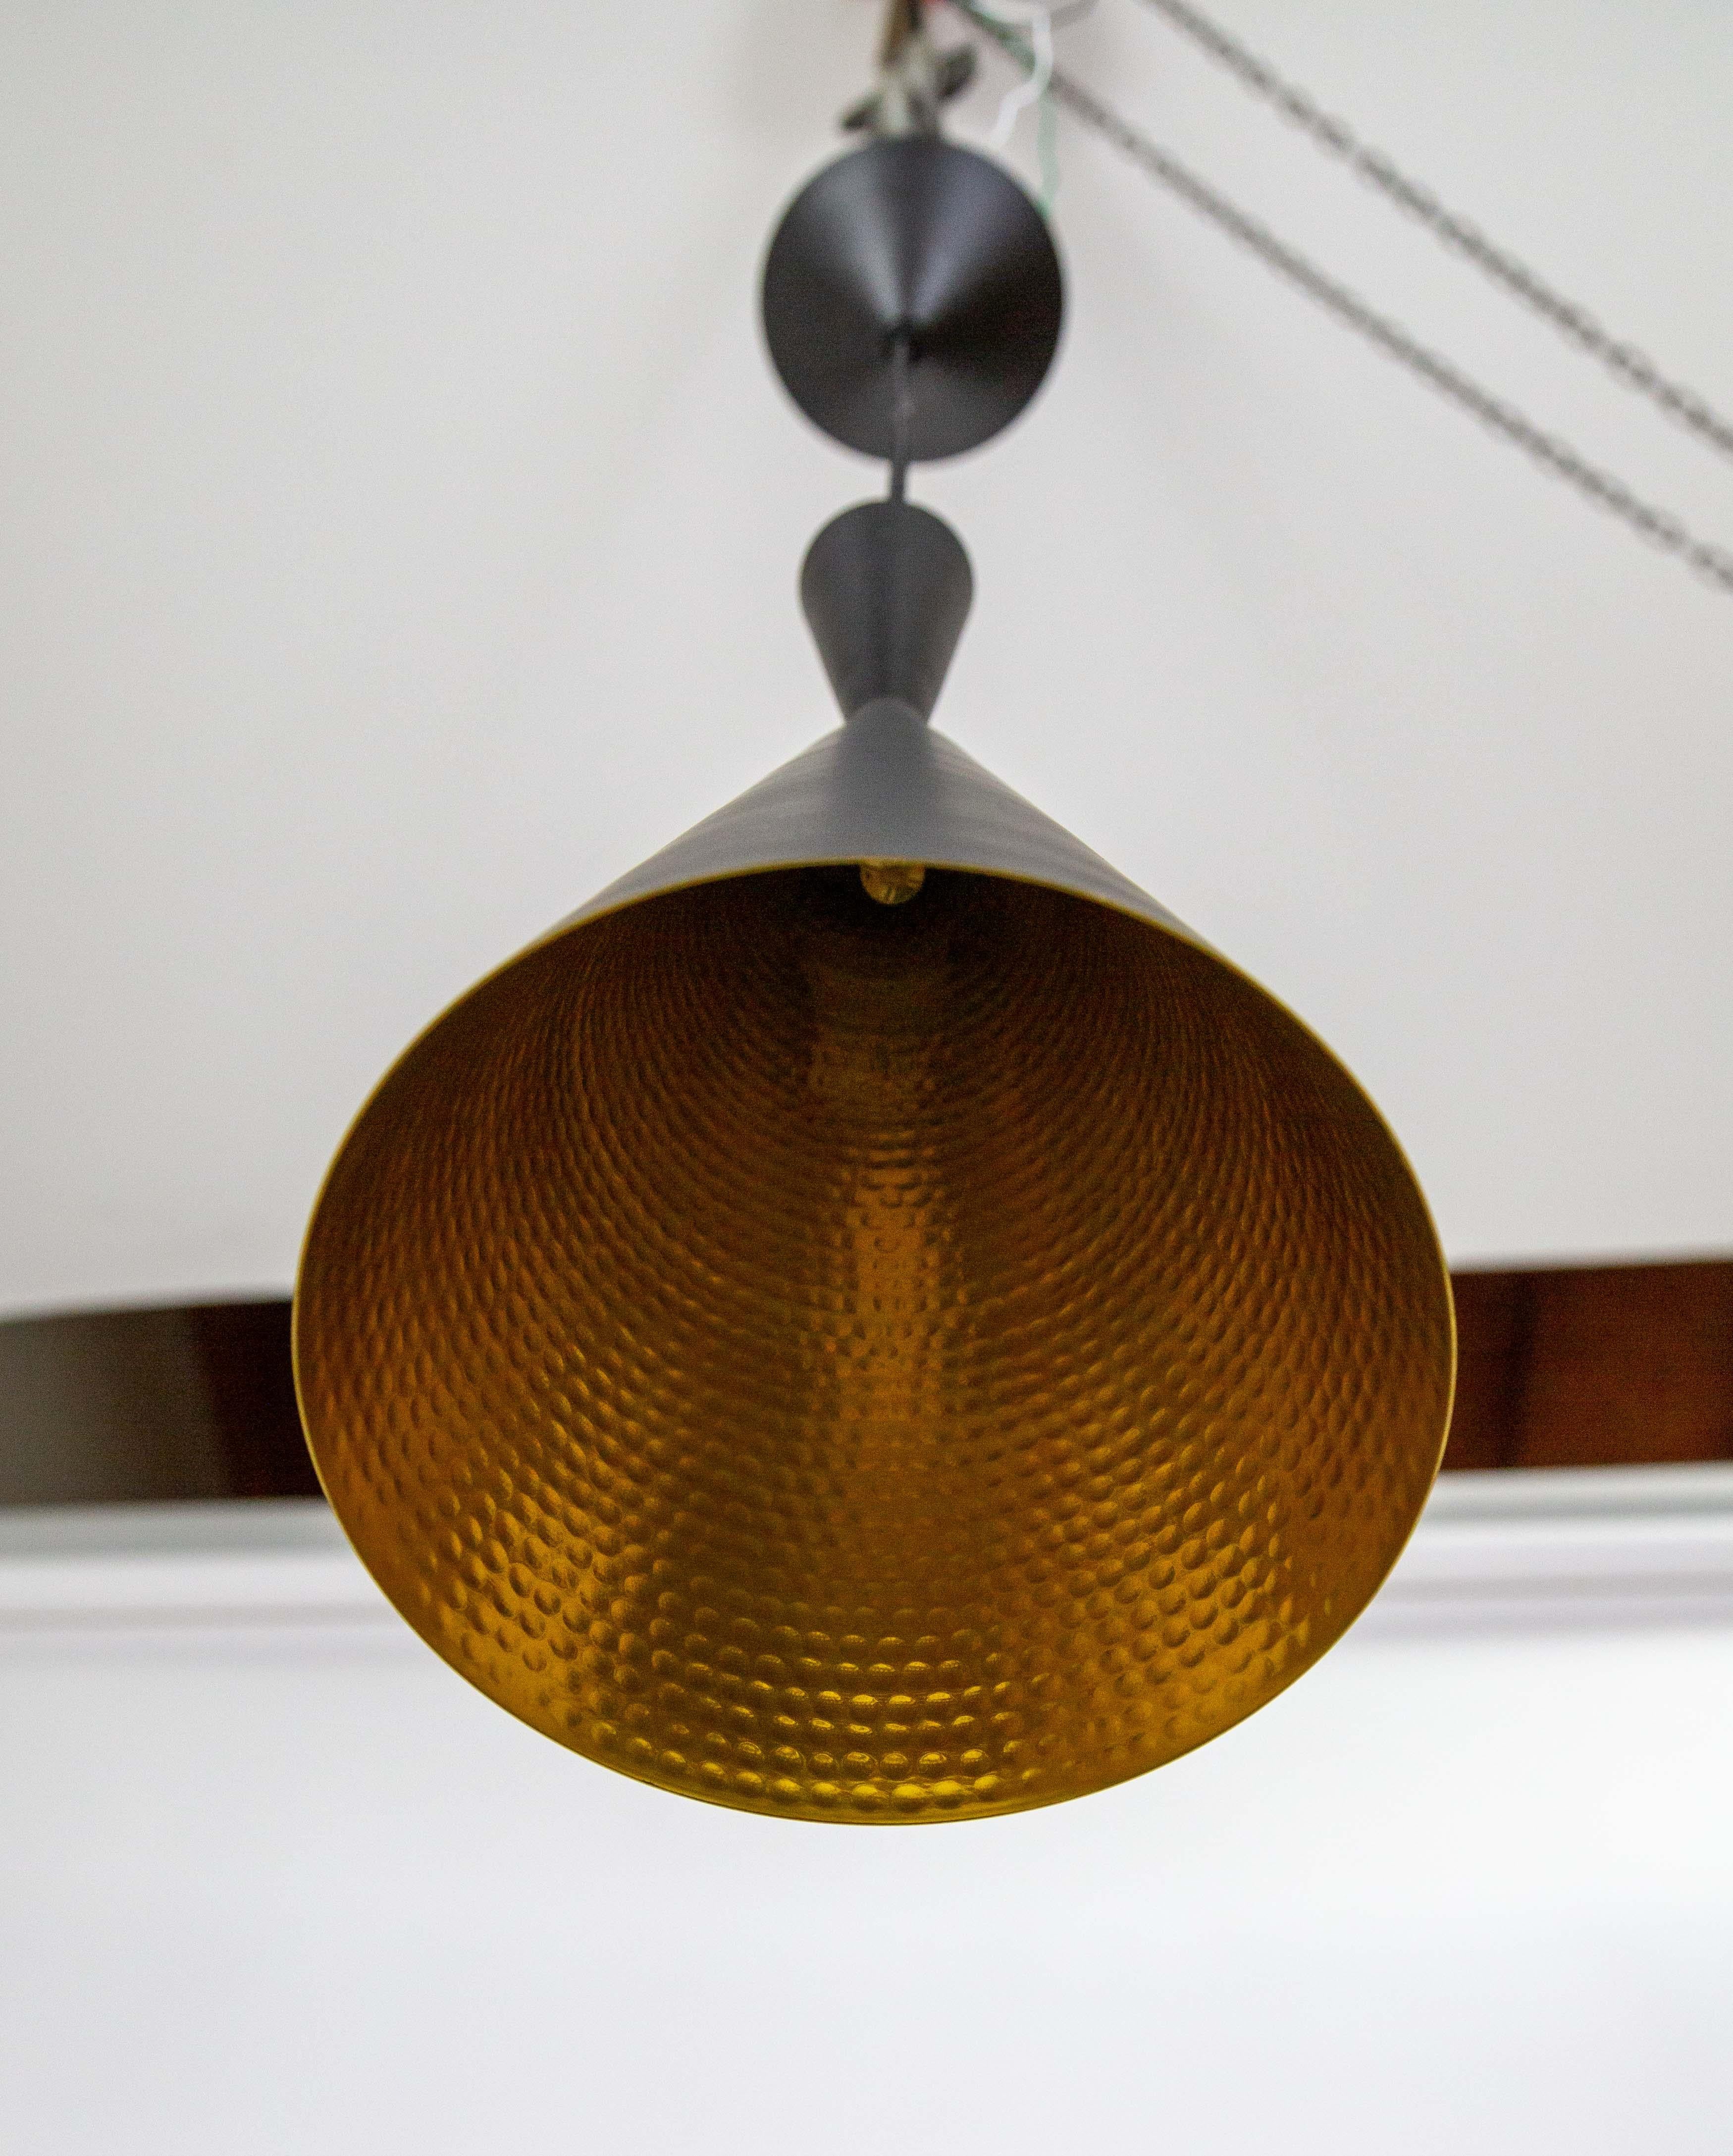 The contemporary Beat Tall pendant light, designed by Tom Dixon, is made of hand spun brass in India. It is satin matte black with a shiny, gold textured interior which refracts and reflects light. With an integrated LED module and black fabric